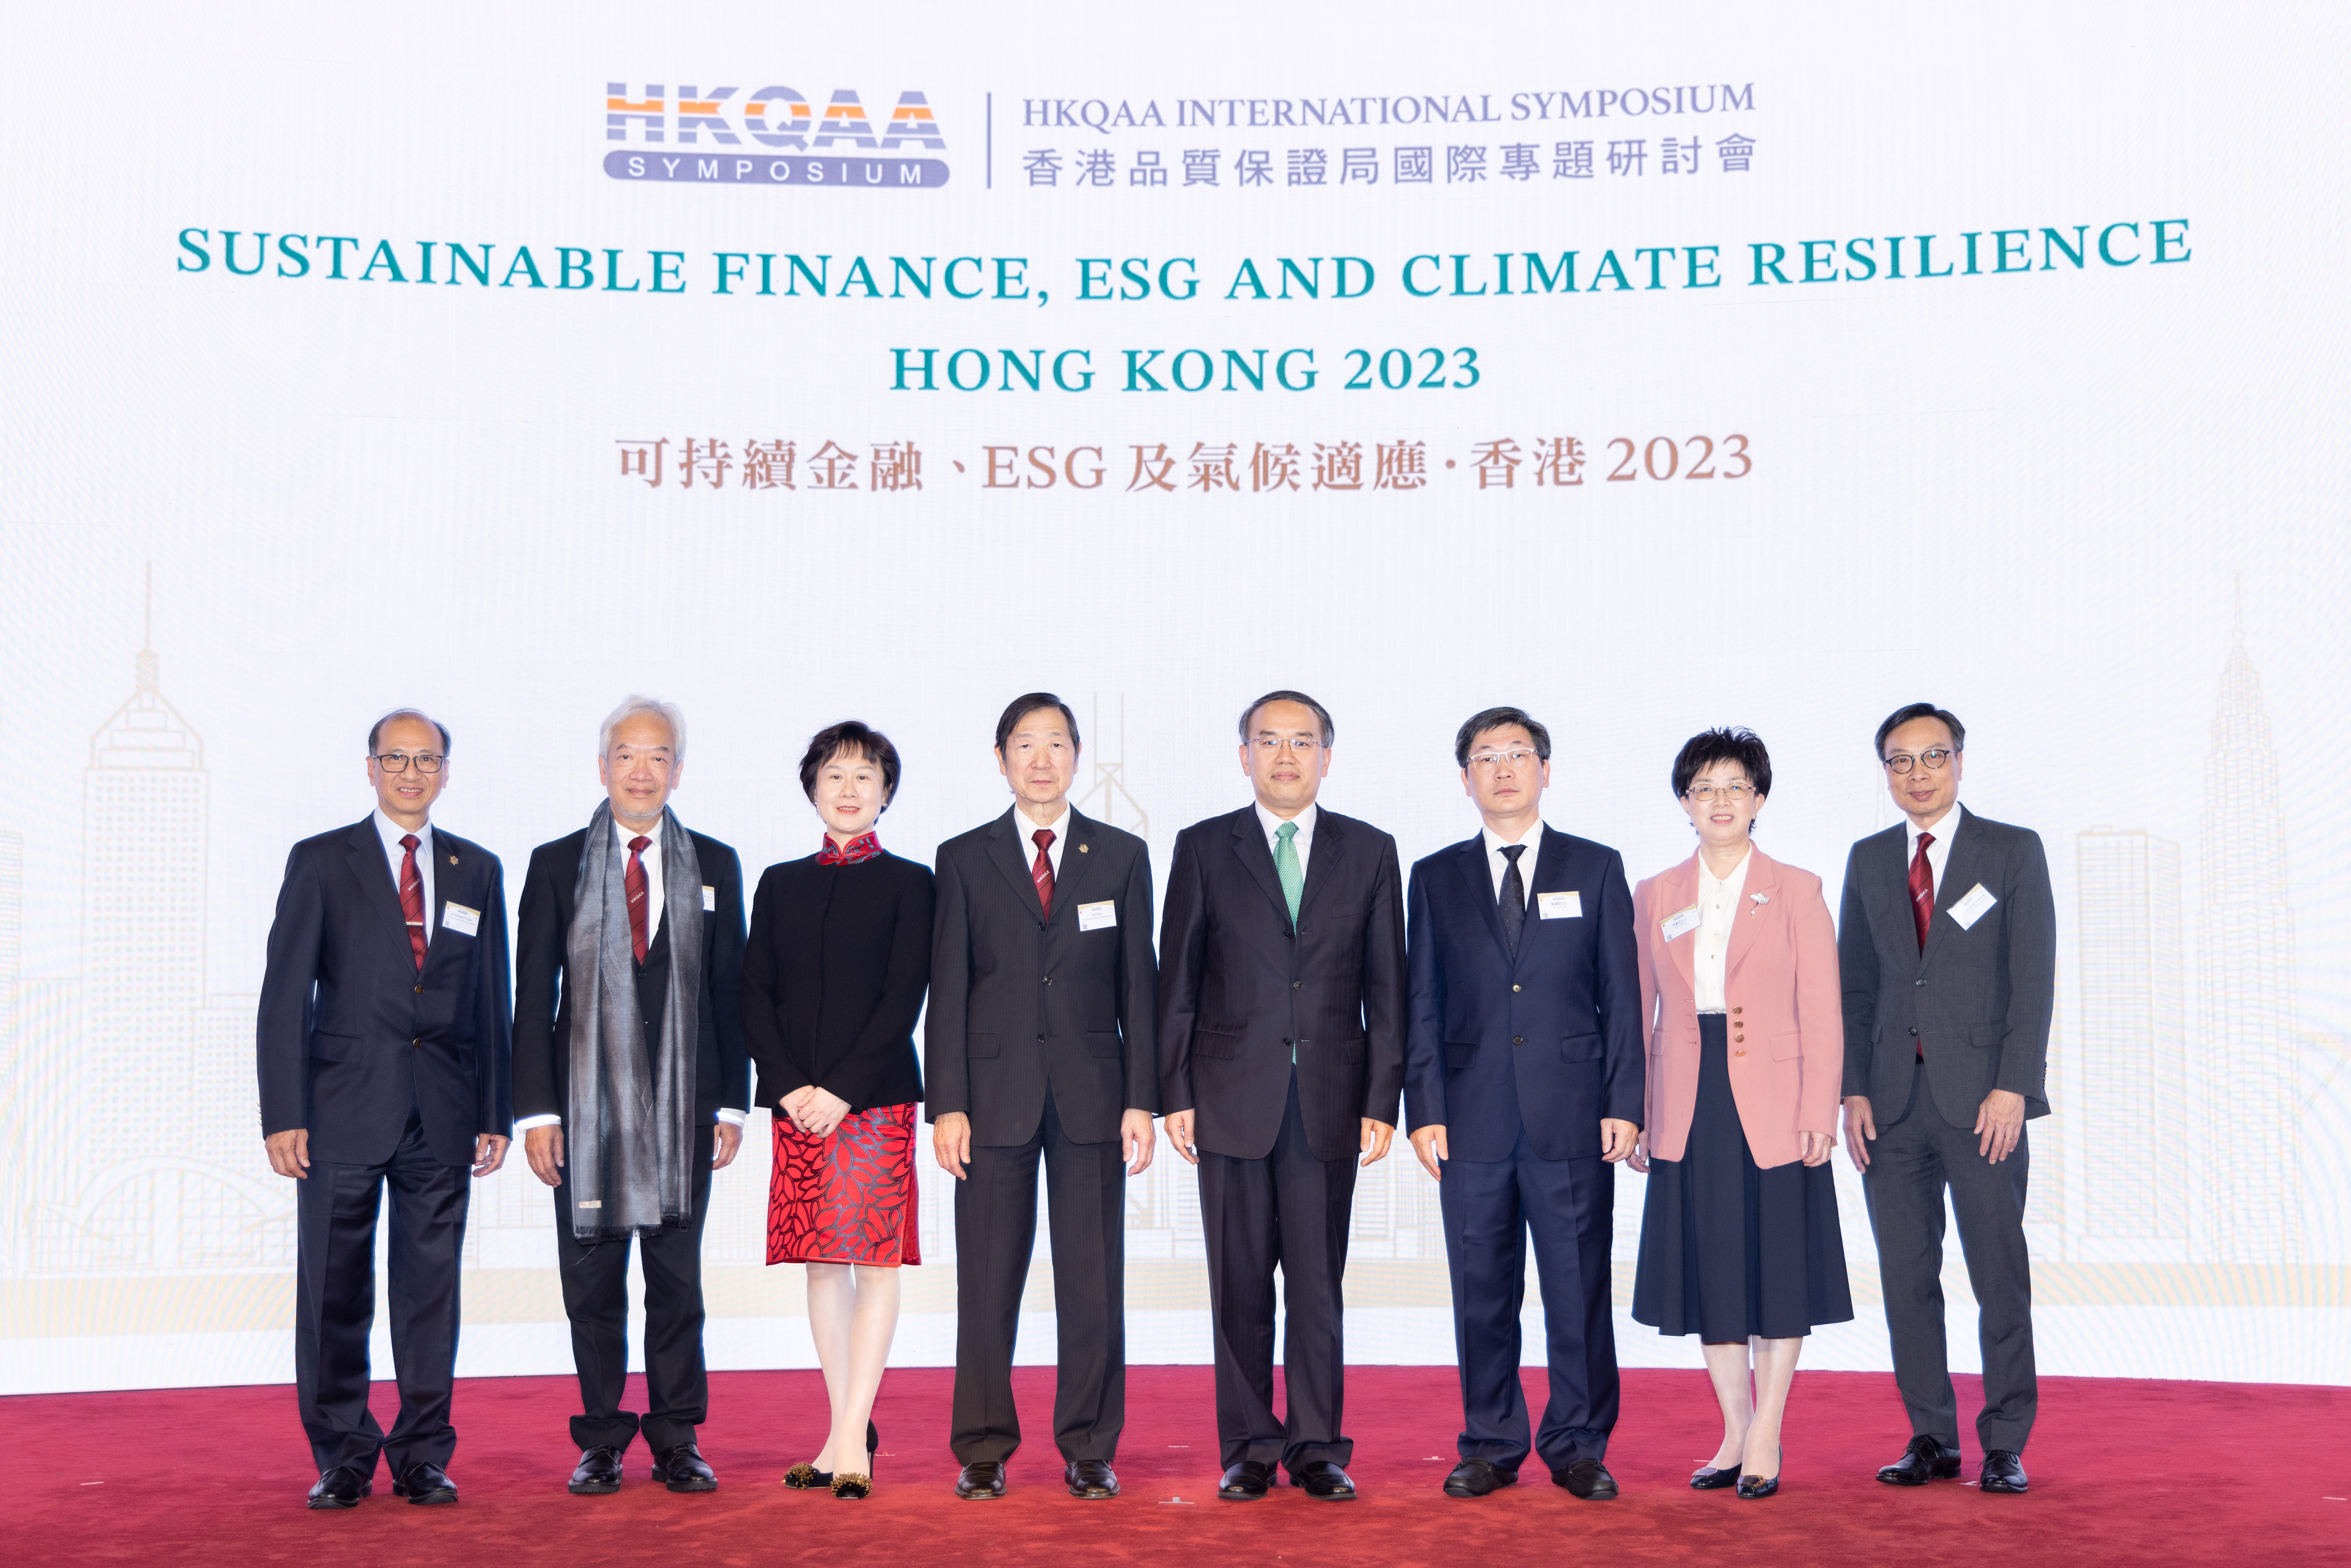 Mr Christopher Hui, GBS, JP, Secretary for Financial Services and the Treasury of the Hong Kong Special Administrative Region(fourth from right); Mr Chen Guohuang, Deputy Director-general of the Department of Finance of Guangdong Province(third from right); Ms Li Lei, Deputy Director-general of the Department of Finance of Hainan Province(third from left); Ms Zhang Sufen, Deputy Director-general of Shenzhen Finance Bureau(second from right); Ir C S Ho, Chairman of HKQAA(fourth from left); Mr Simon Wong Ka Wo, BBS, JP, Deputy Chairman of HKQAA(second from left); Sr Lam Kin Wing Eddie, MH, Deputy Chairman of HKQAA (first from right); Dr Michael P. H. Lam, Chief Executive Officer of HKQAA (first from left) at the HKQAA International Symposium 2023